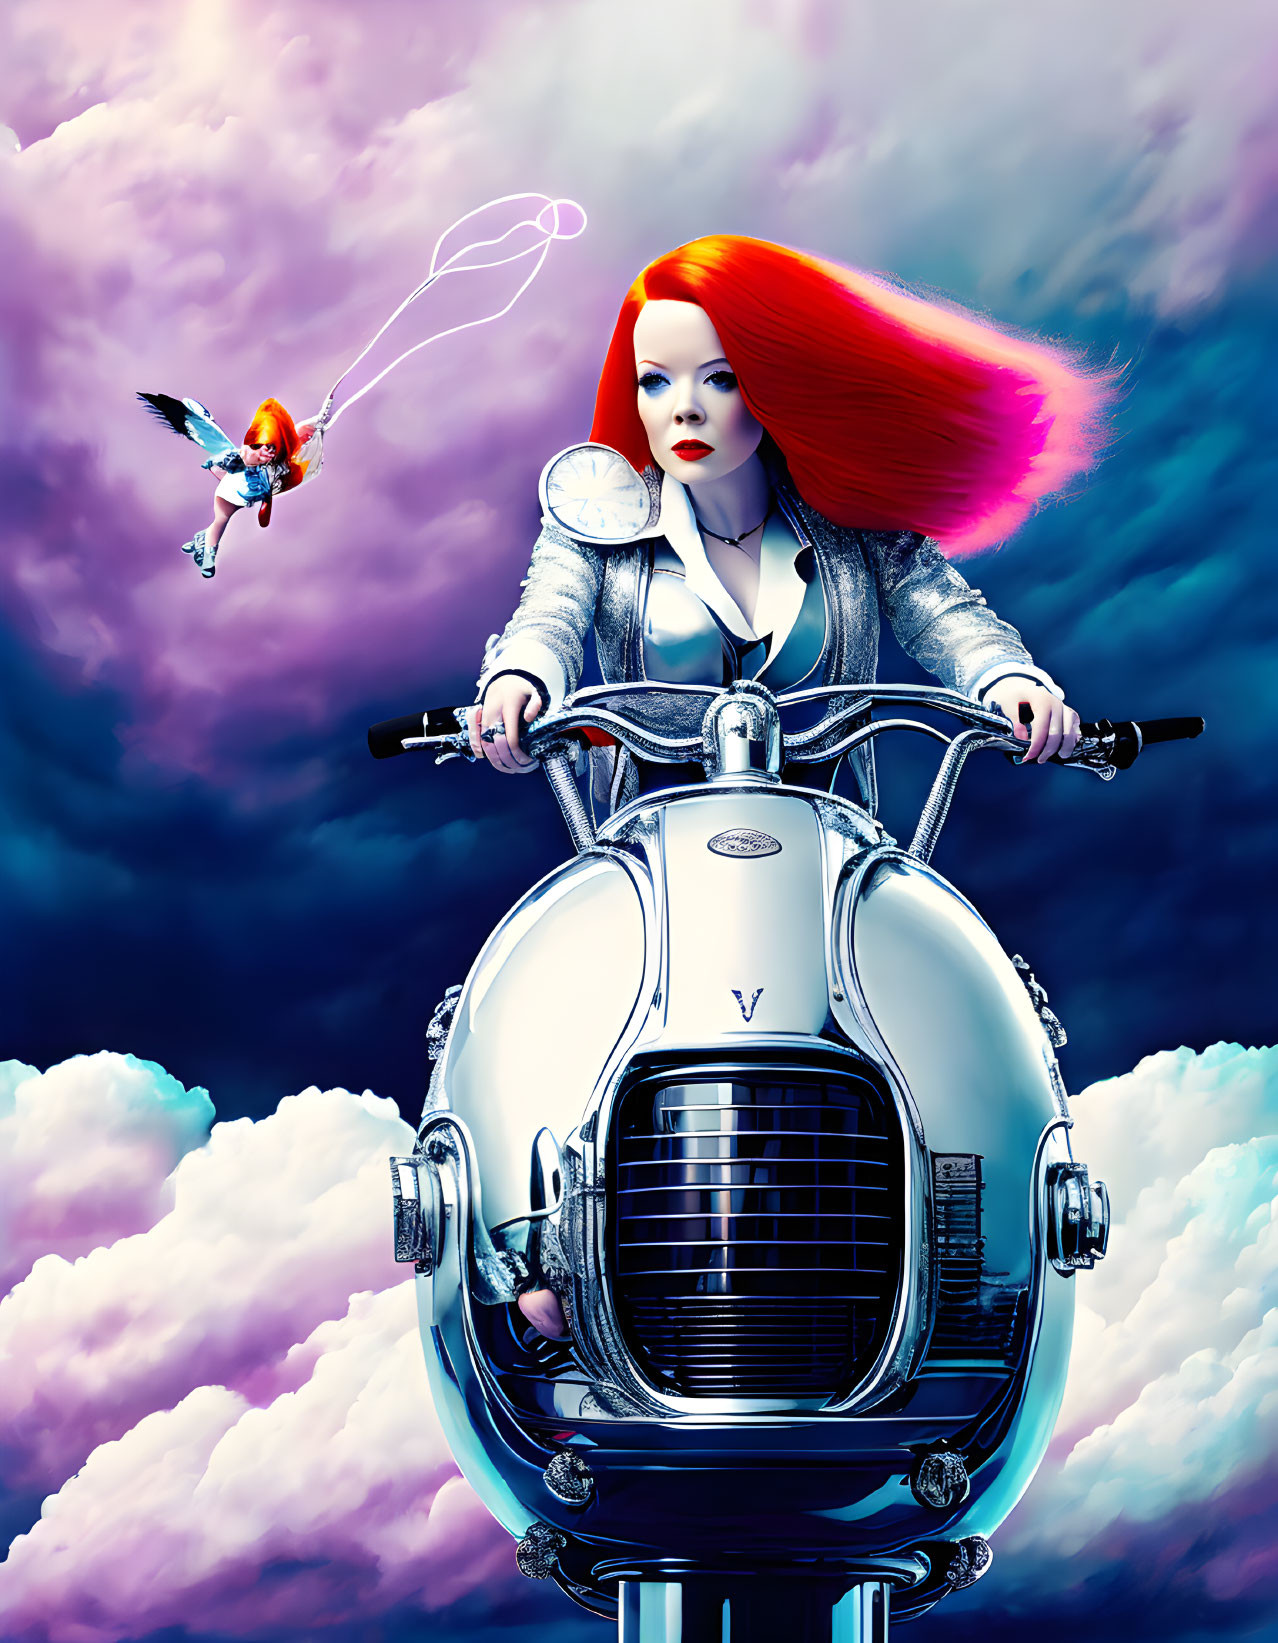 Red-haired woman on classic scooter with winged character in purple sky